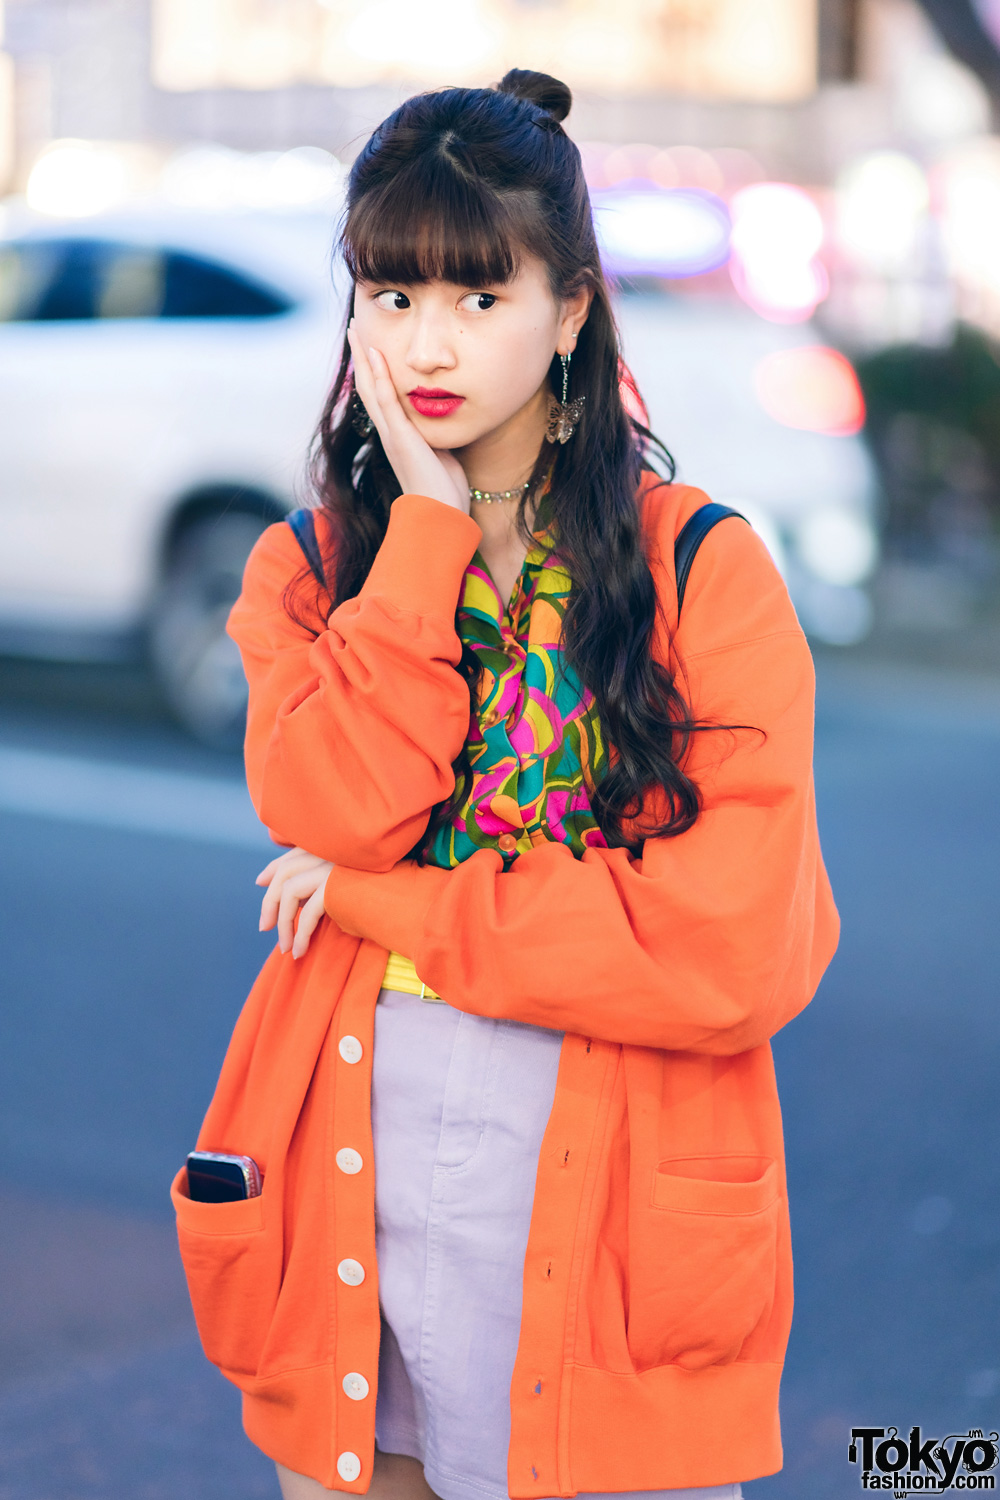 Japanese Pop Idol A-pon in Vintage-Inspired Street Fashion w/ Butterfly